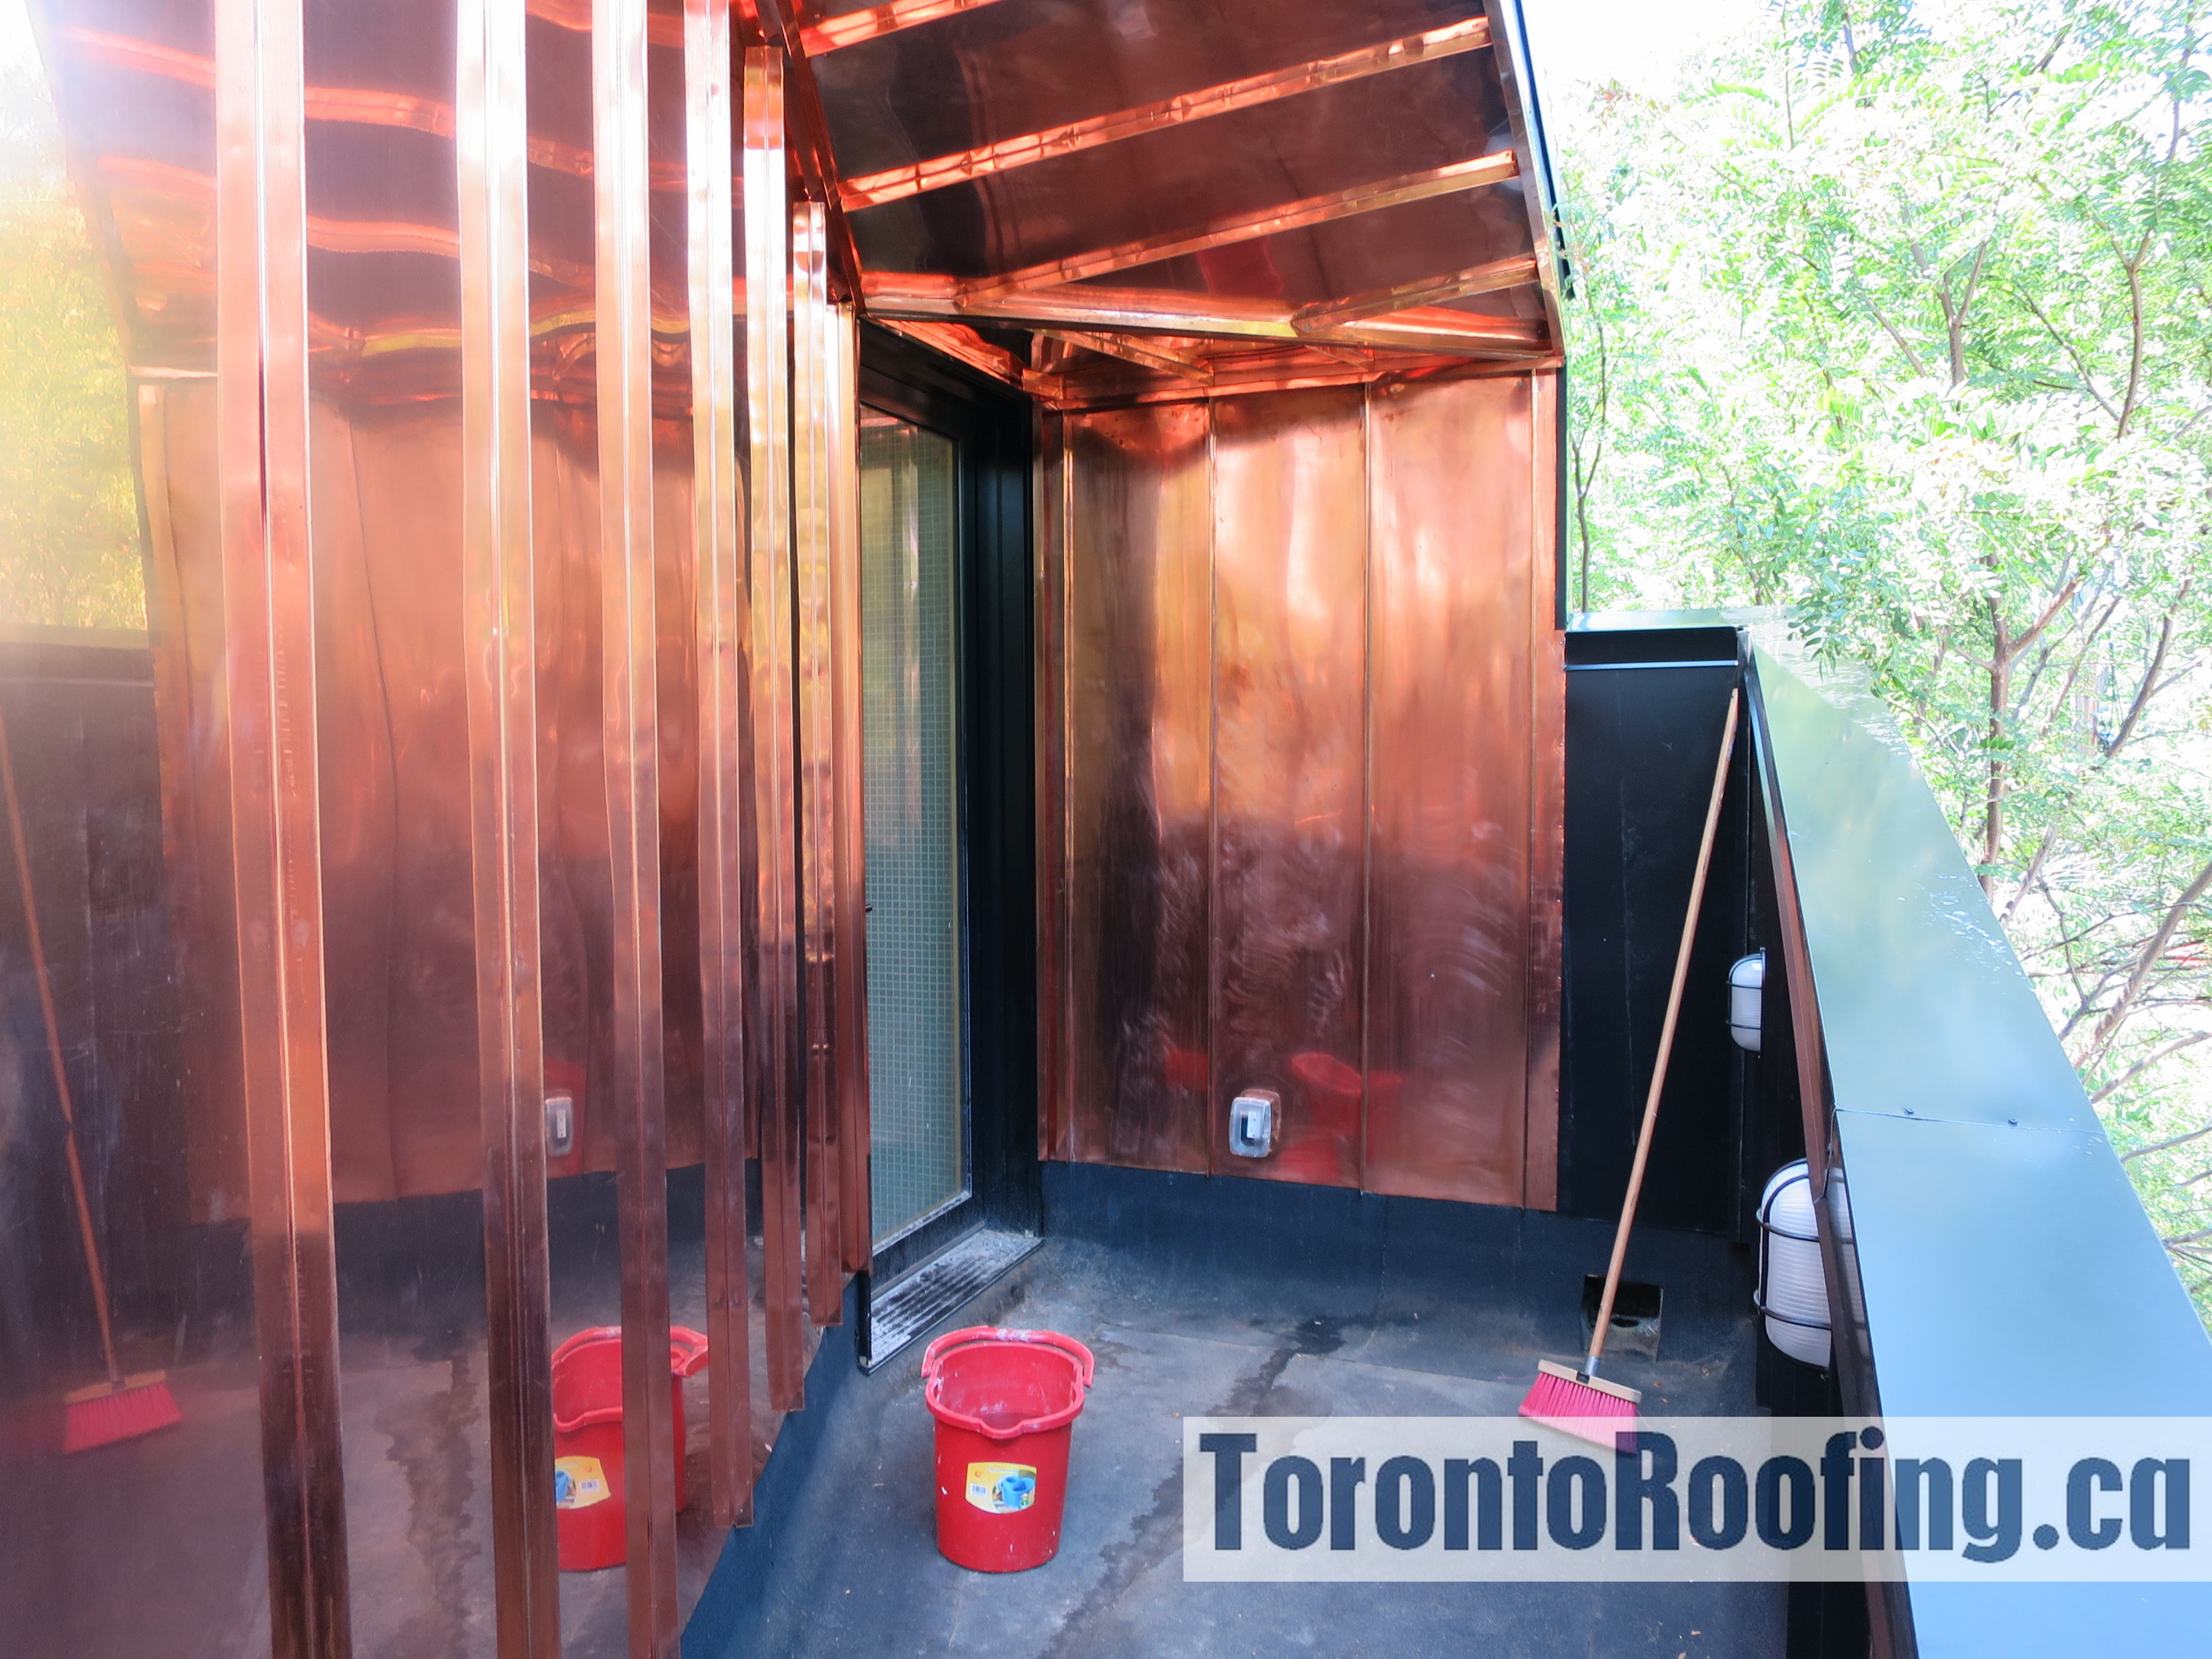 toronto-roofing-roof-siding-metal-copper-wood-modern-homes-aluminum-cladding-architeture-building-contractor-exterior-16